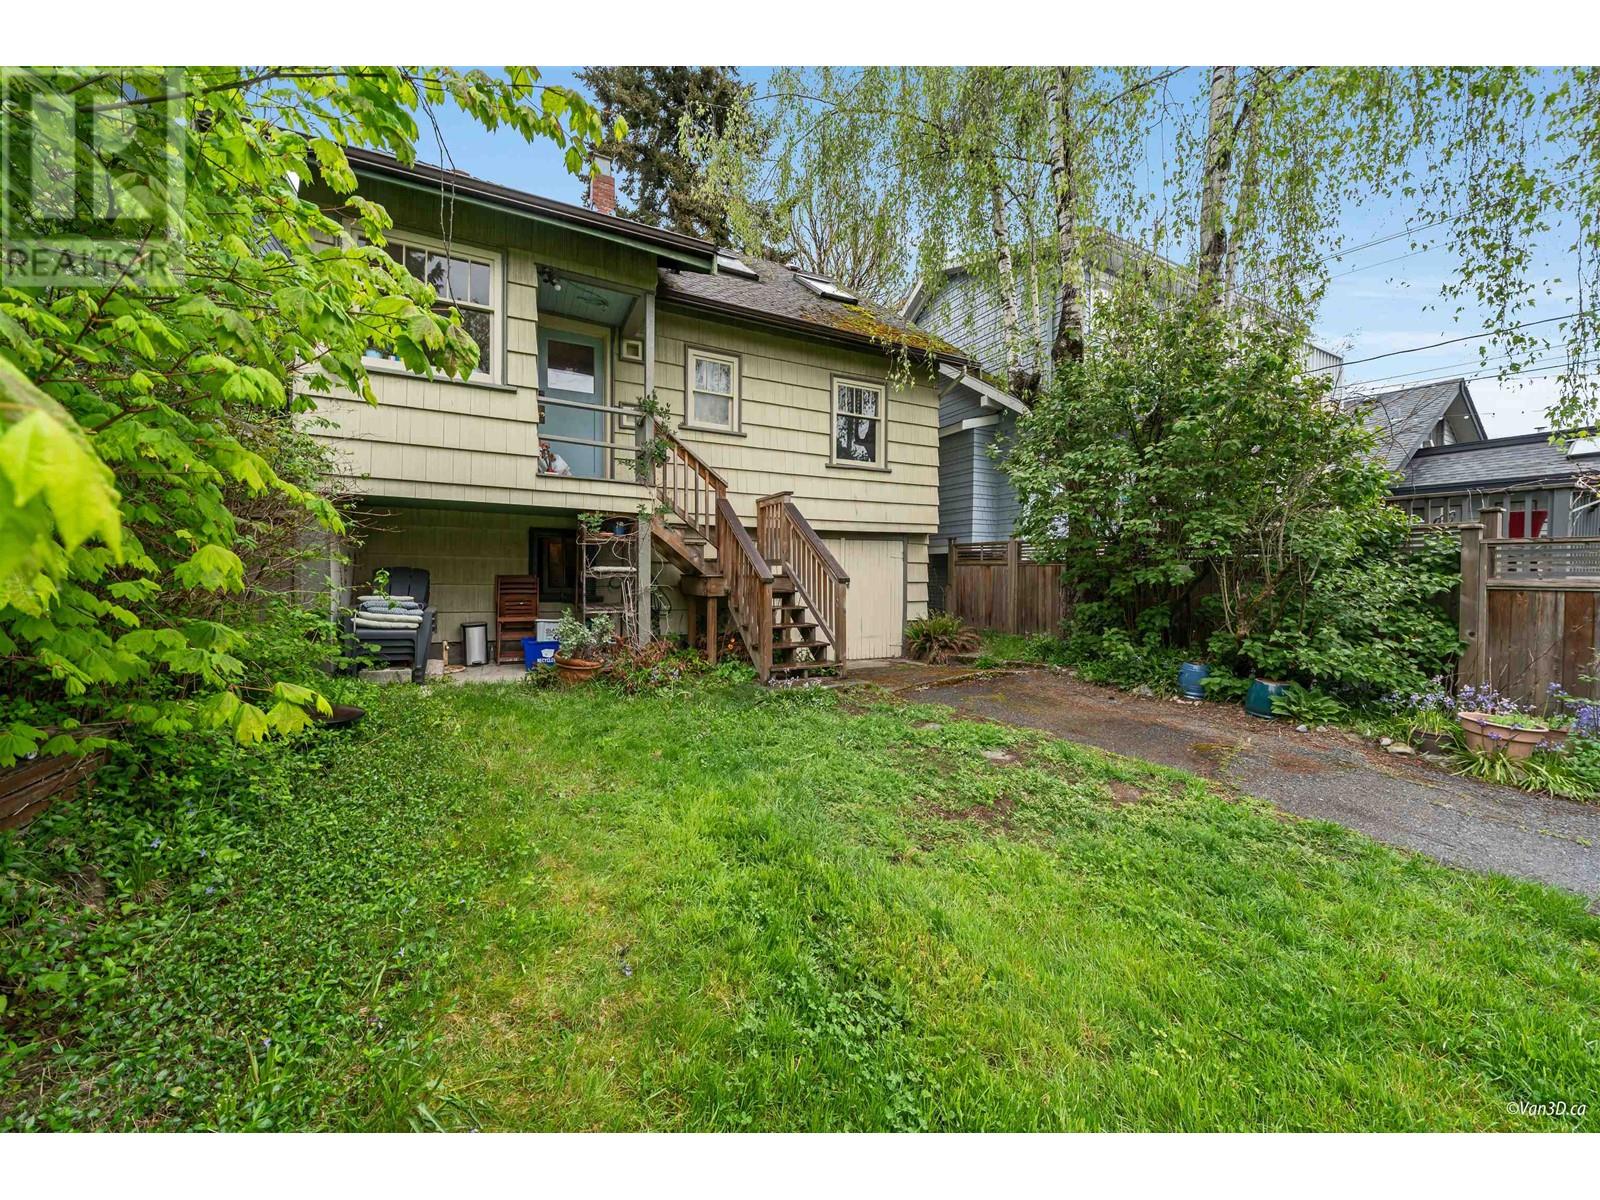 Listing Picture 26 of 31 : 3760 W 37TH AVENUE, Vancouver / 溫哥華 - 魯藝地產 Yvonne Lu Group - MLS Medallion Club Member